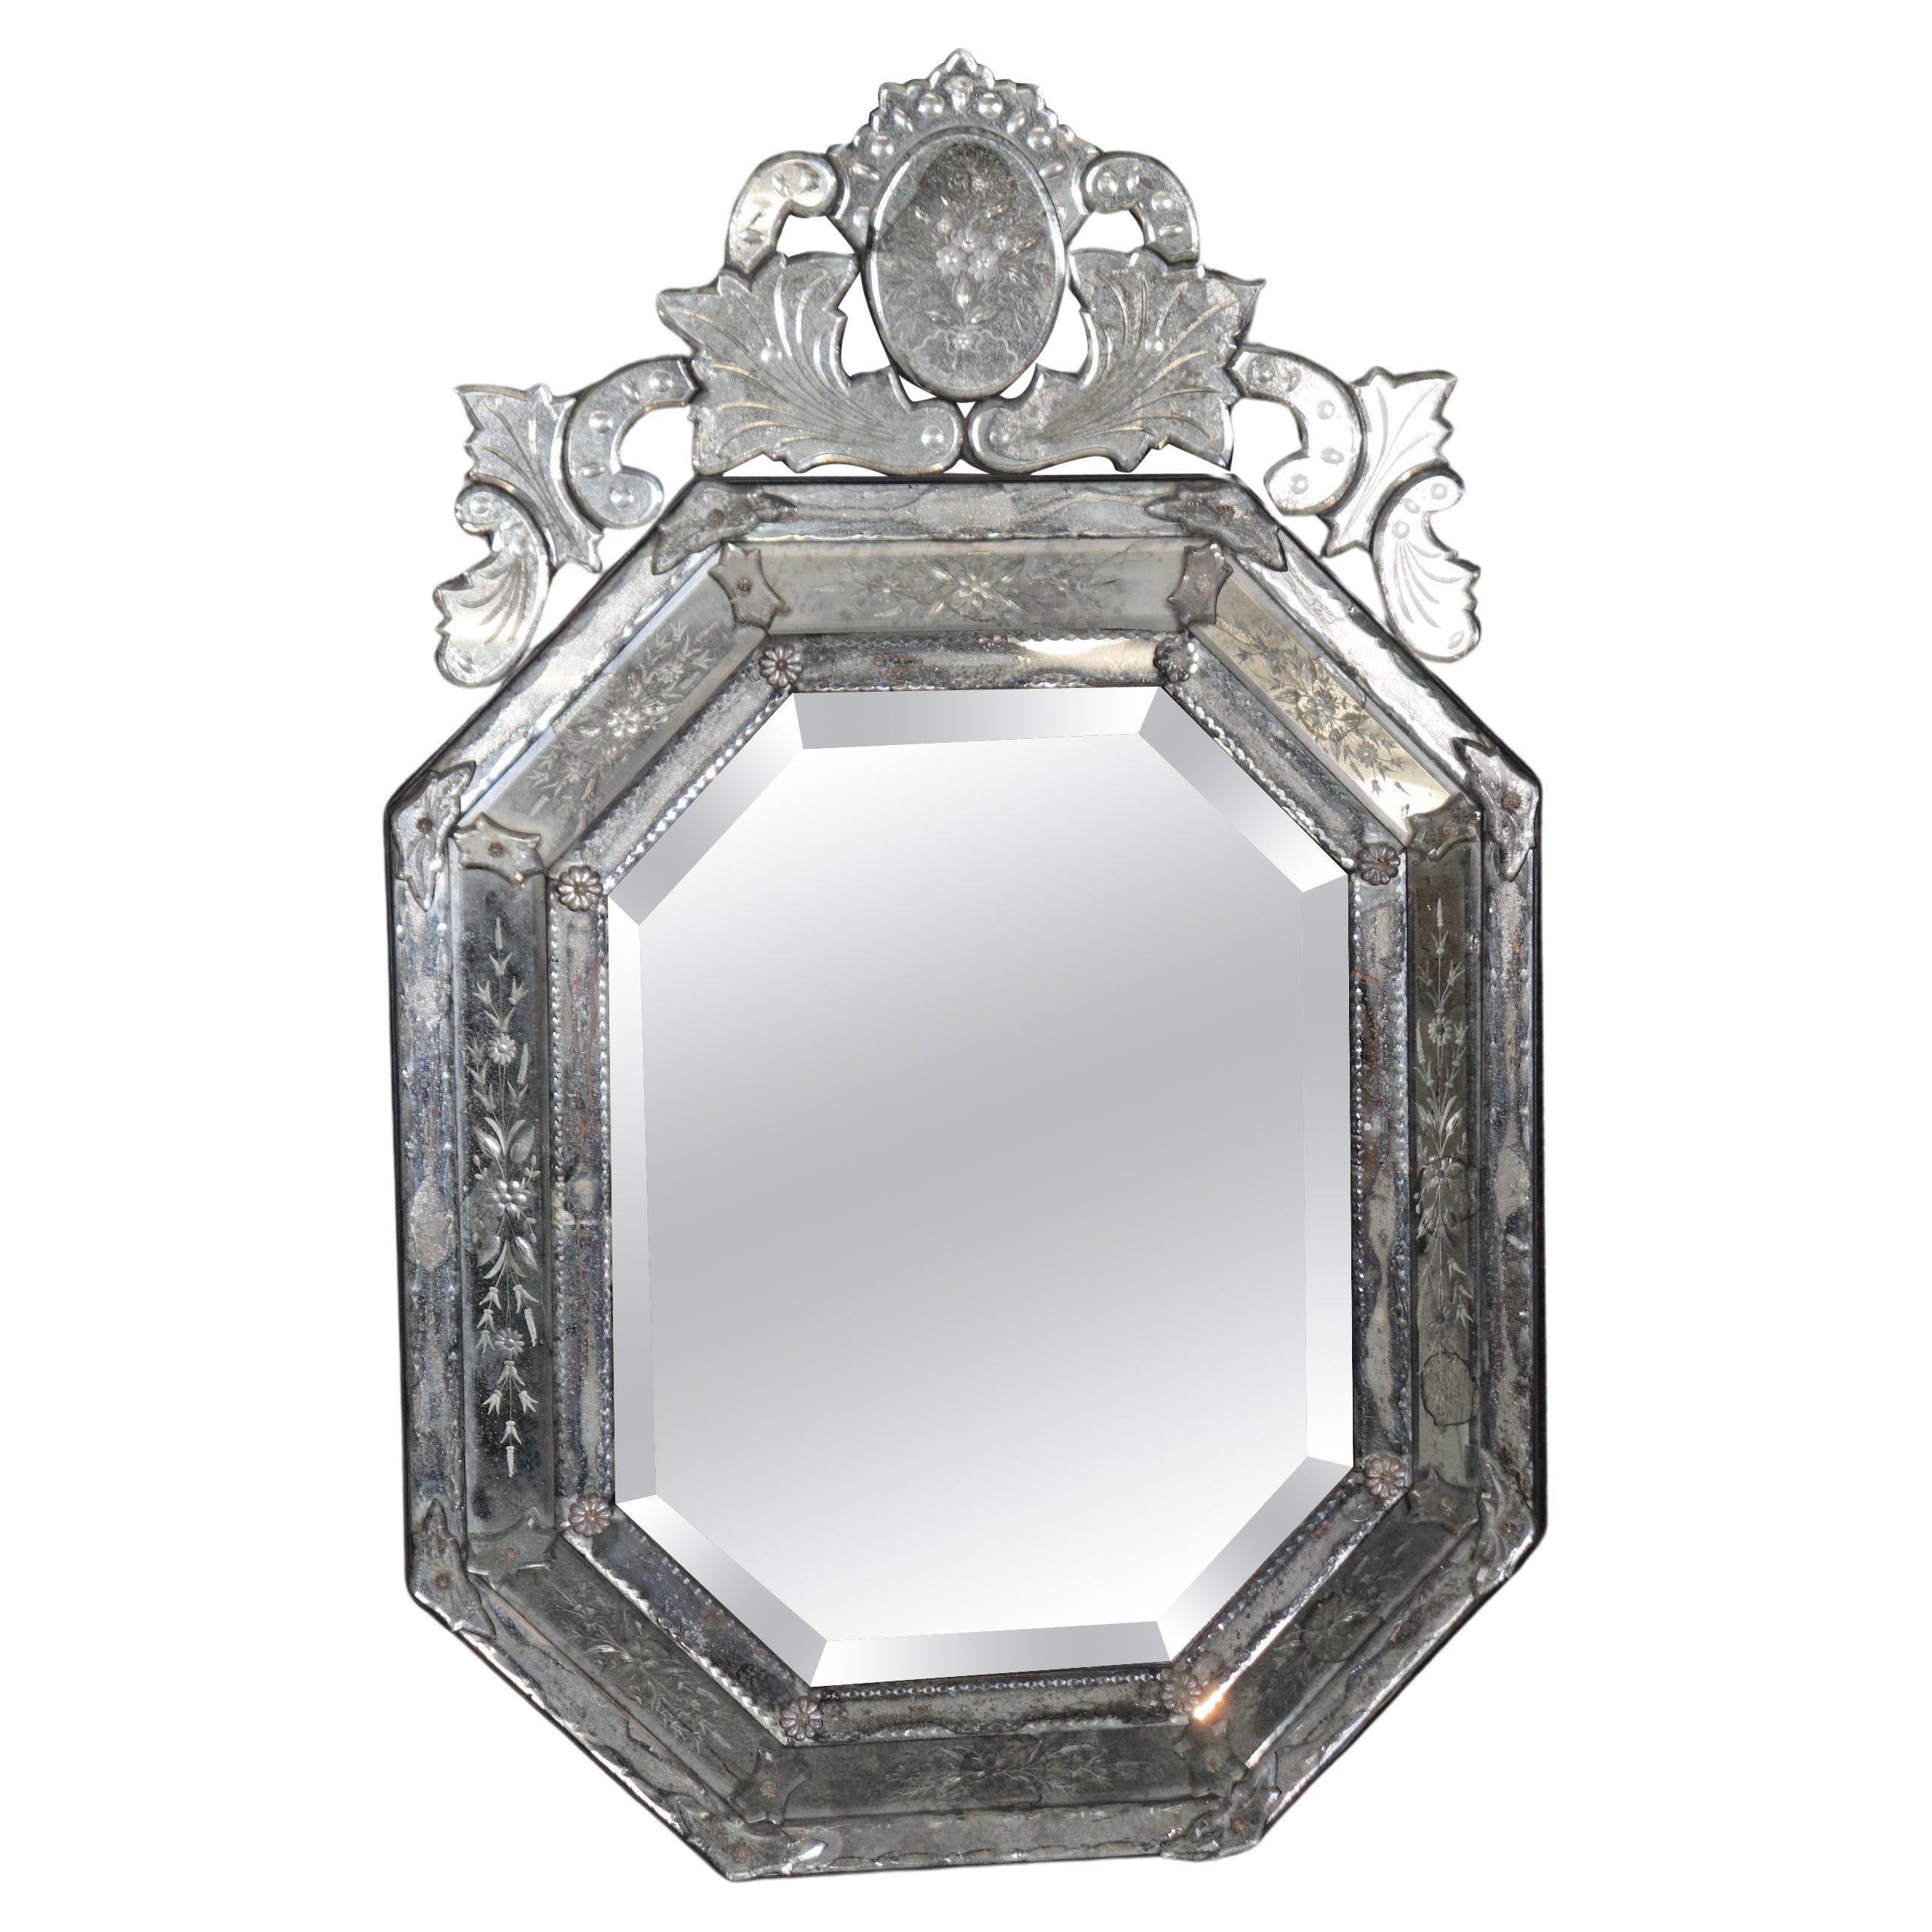 Neoclassical Revival Wall Mirrors